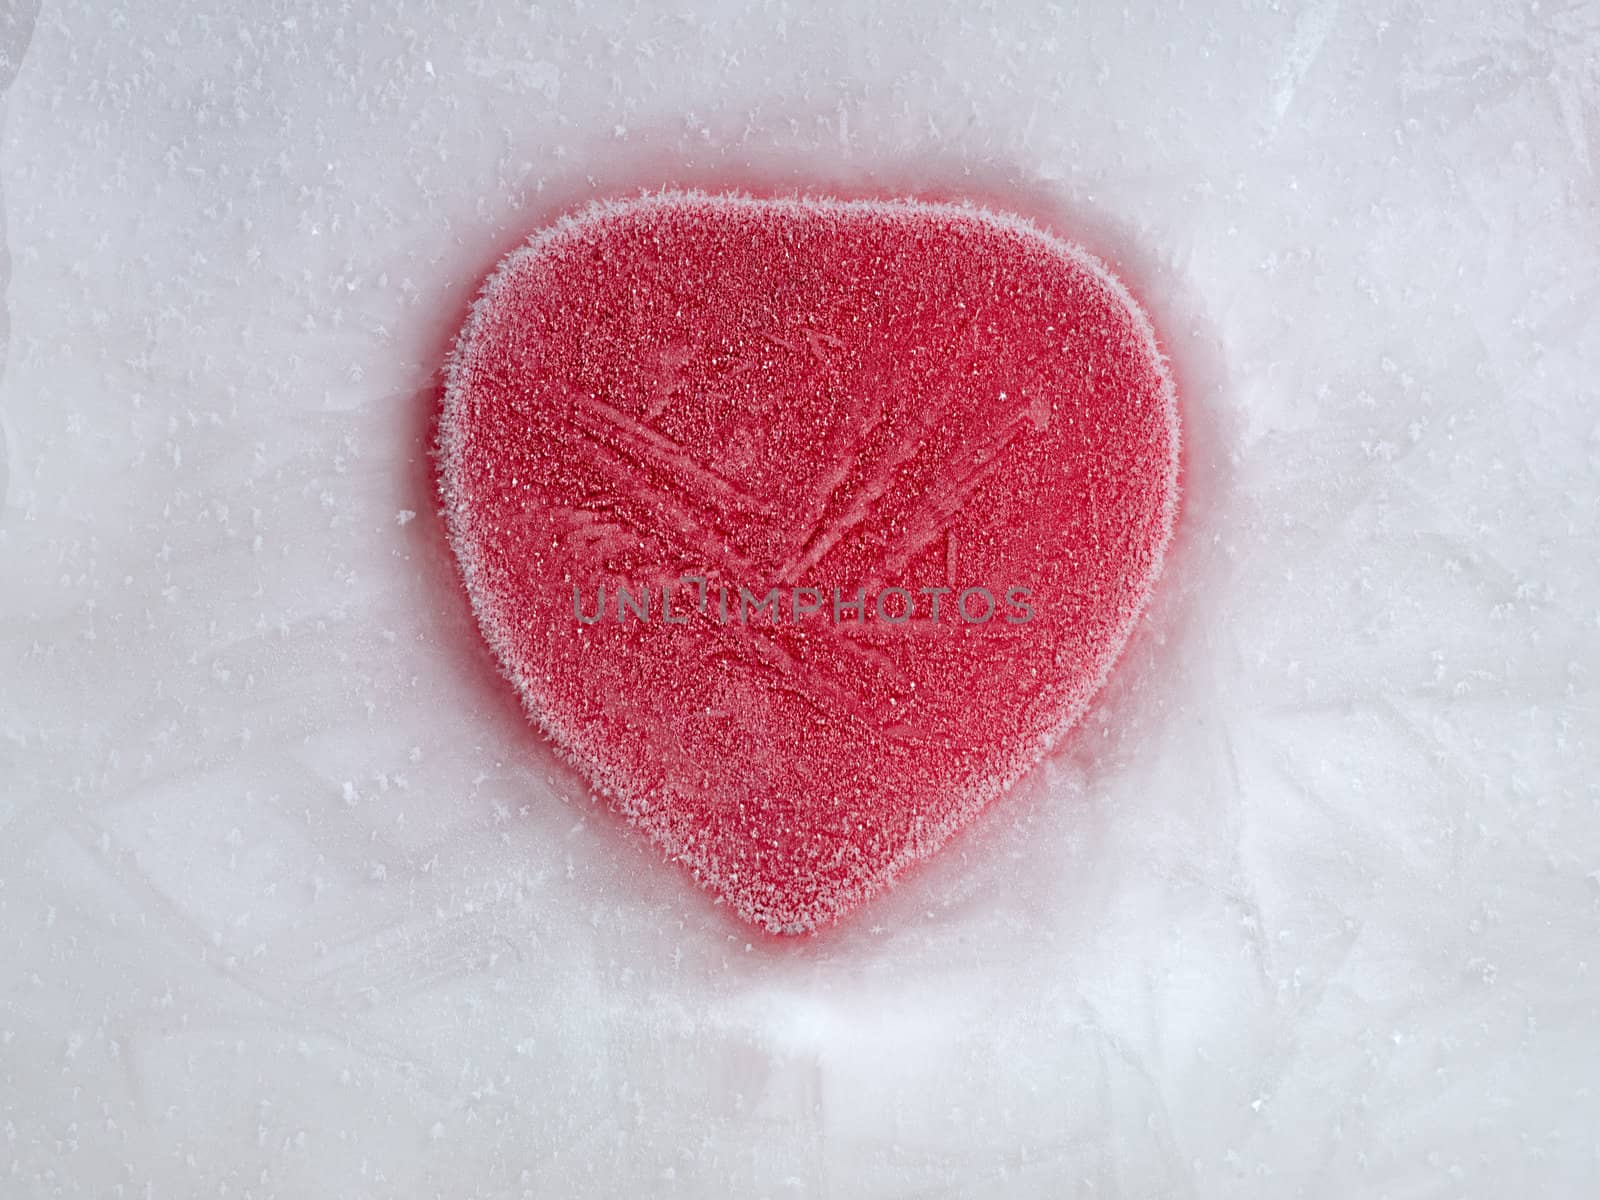 Frozen beautiful red heart with Ice Crystal